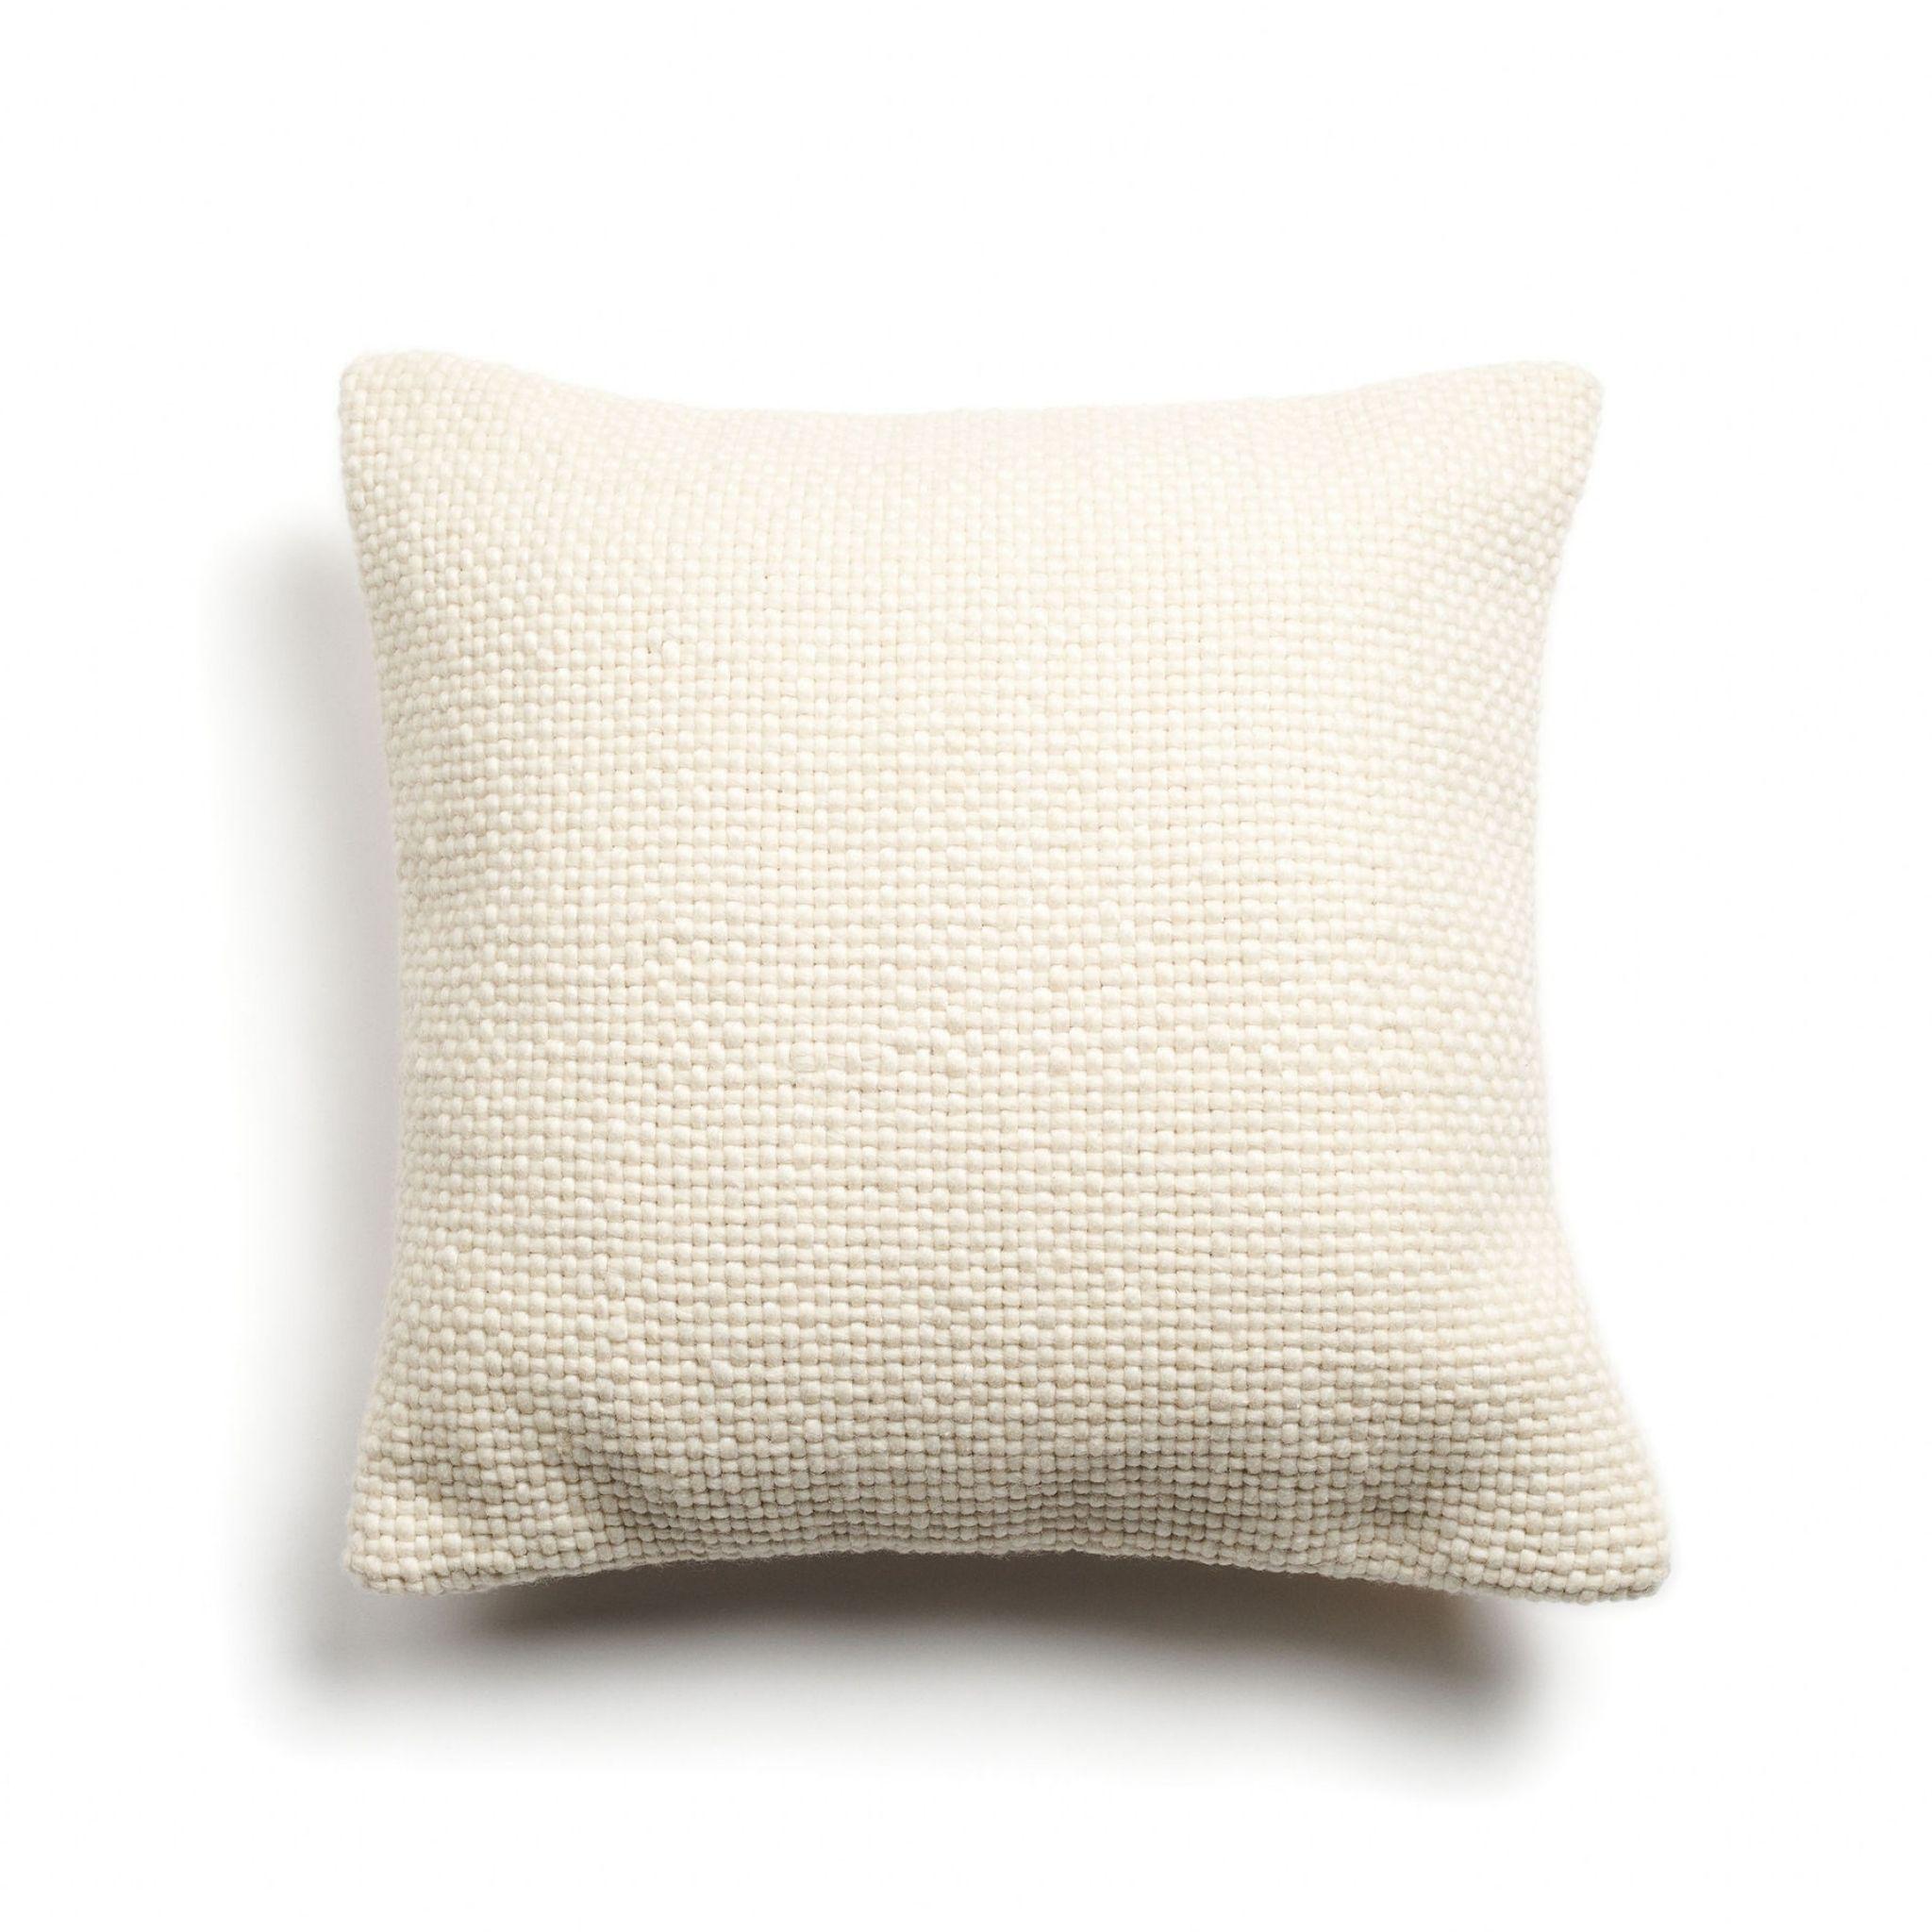 Cloud White Handwoven Merino Pillow In Classic Basket Weave Pattern By Artisans  In New Condition For Sale In Bloomfield Hills, MI